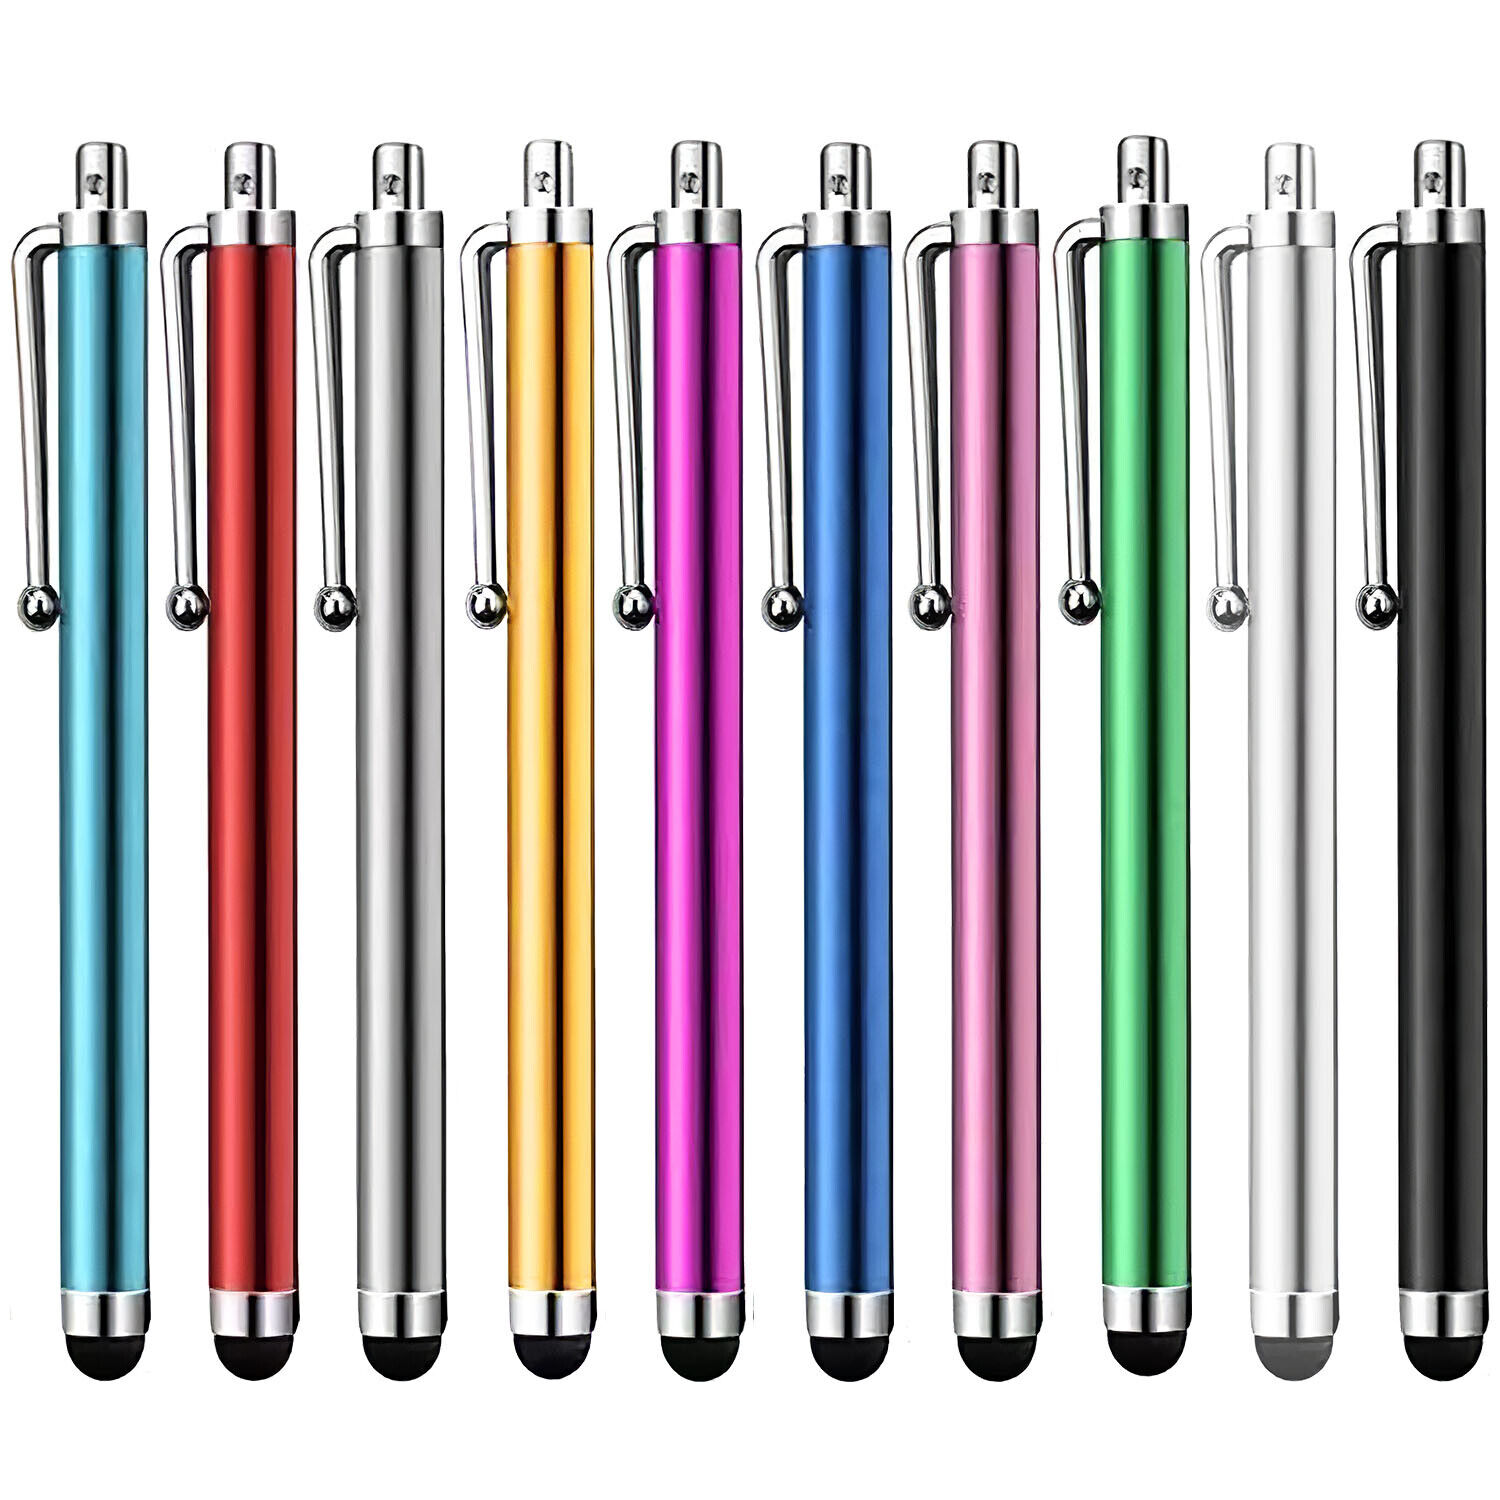 10 Pack Stylus Pens for Touch Screens Capacitive For IPad iPhone Samsung Tablet